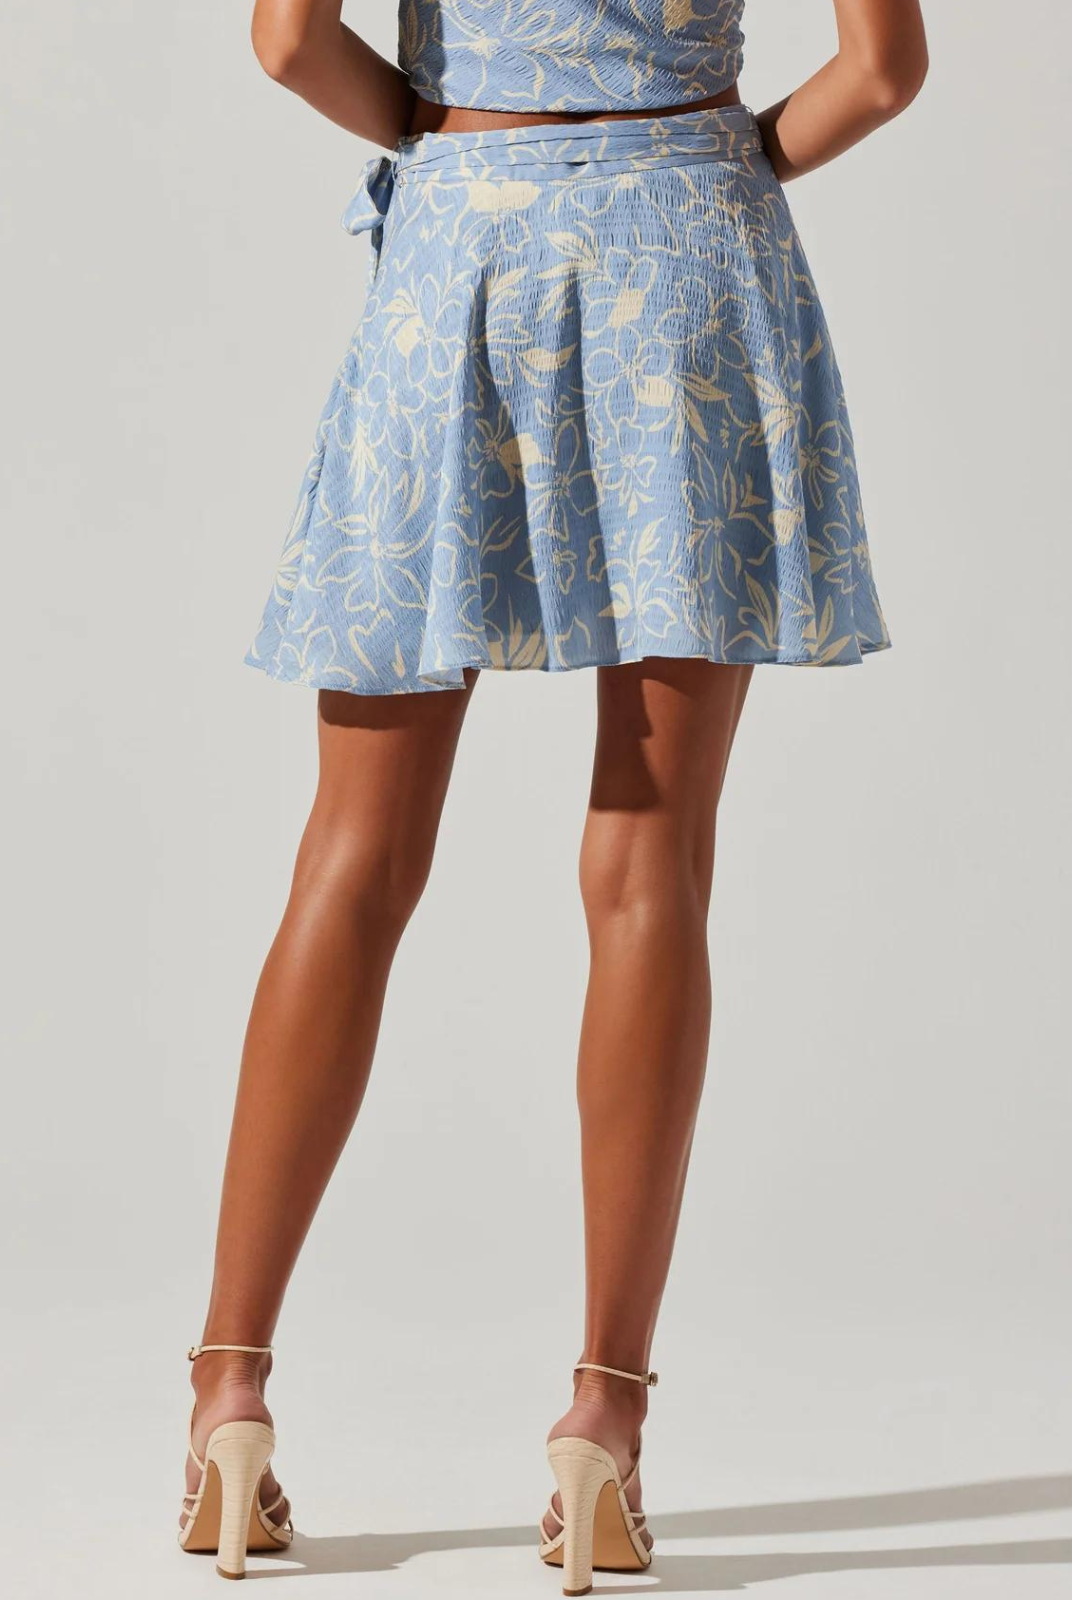 ASTR The Label Tazia Skirt. Sketched floral design Fitted at waist with relaxed skirt Concealed side zipper with side tie detail The Tazia Skirt pairs well with the Tazia Top.